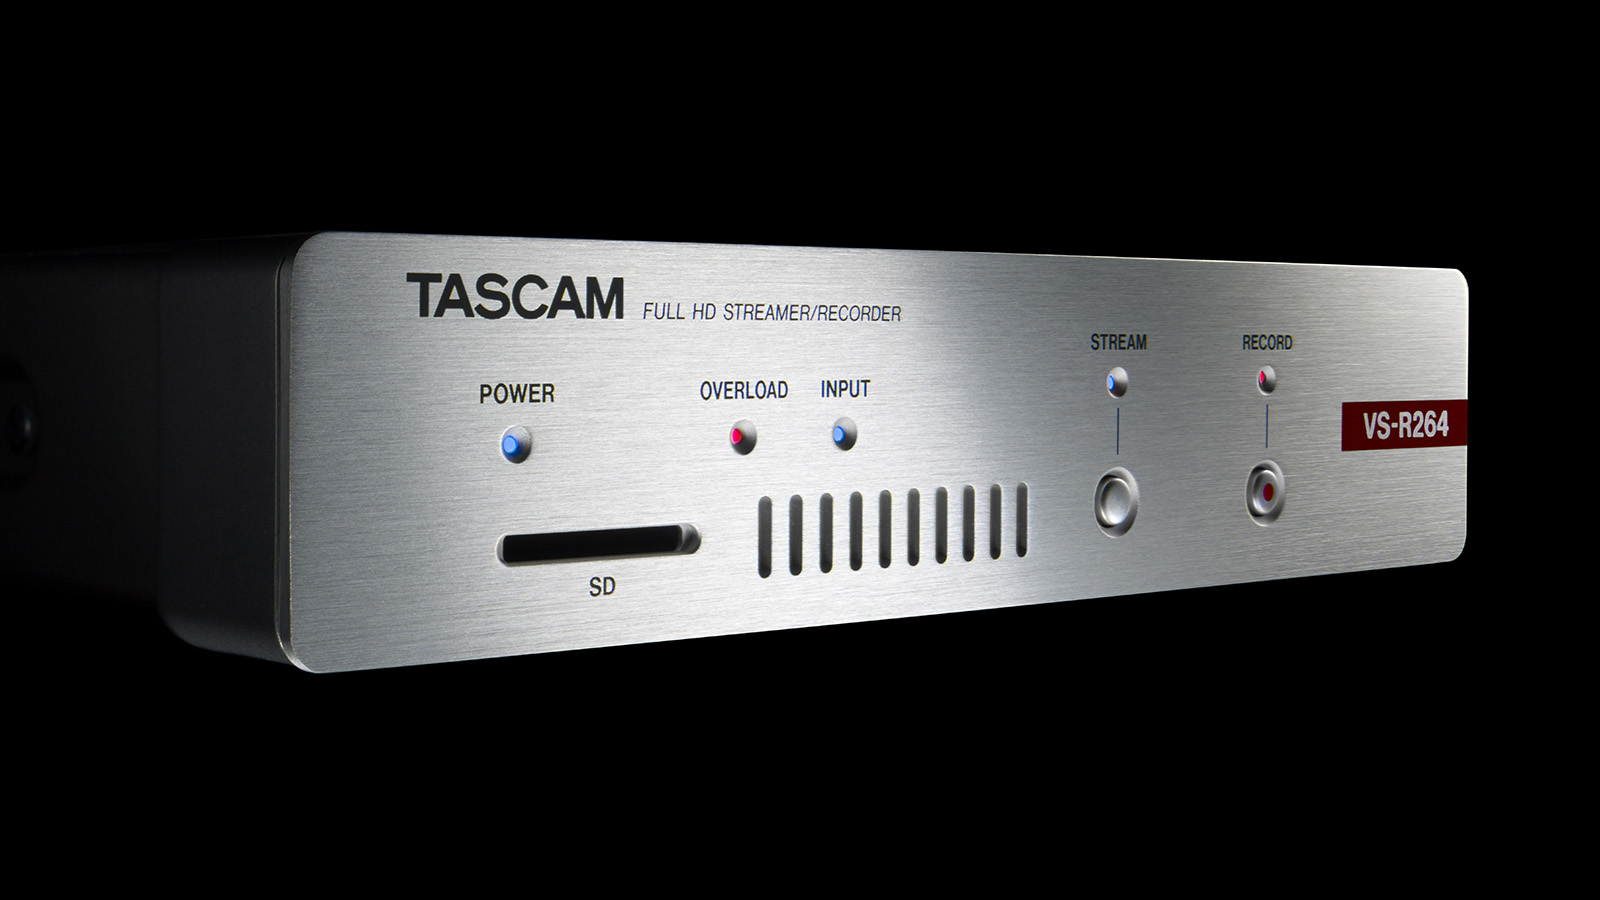 Professional Grade Streaming Made Easy with TASCAM's VS-R264 Video Encoder/Decoder